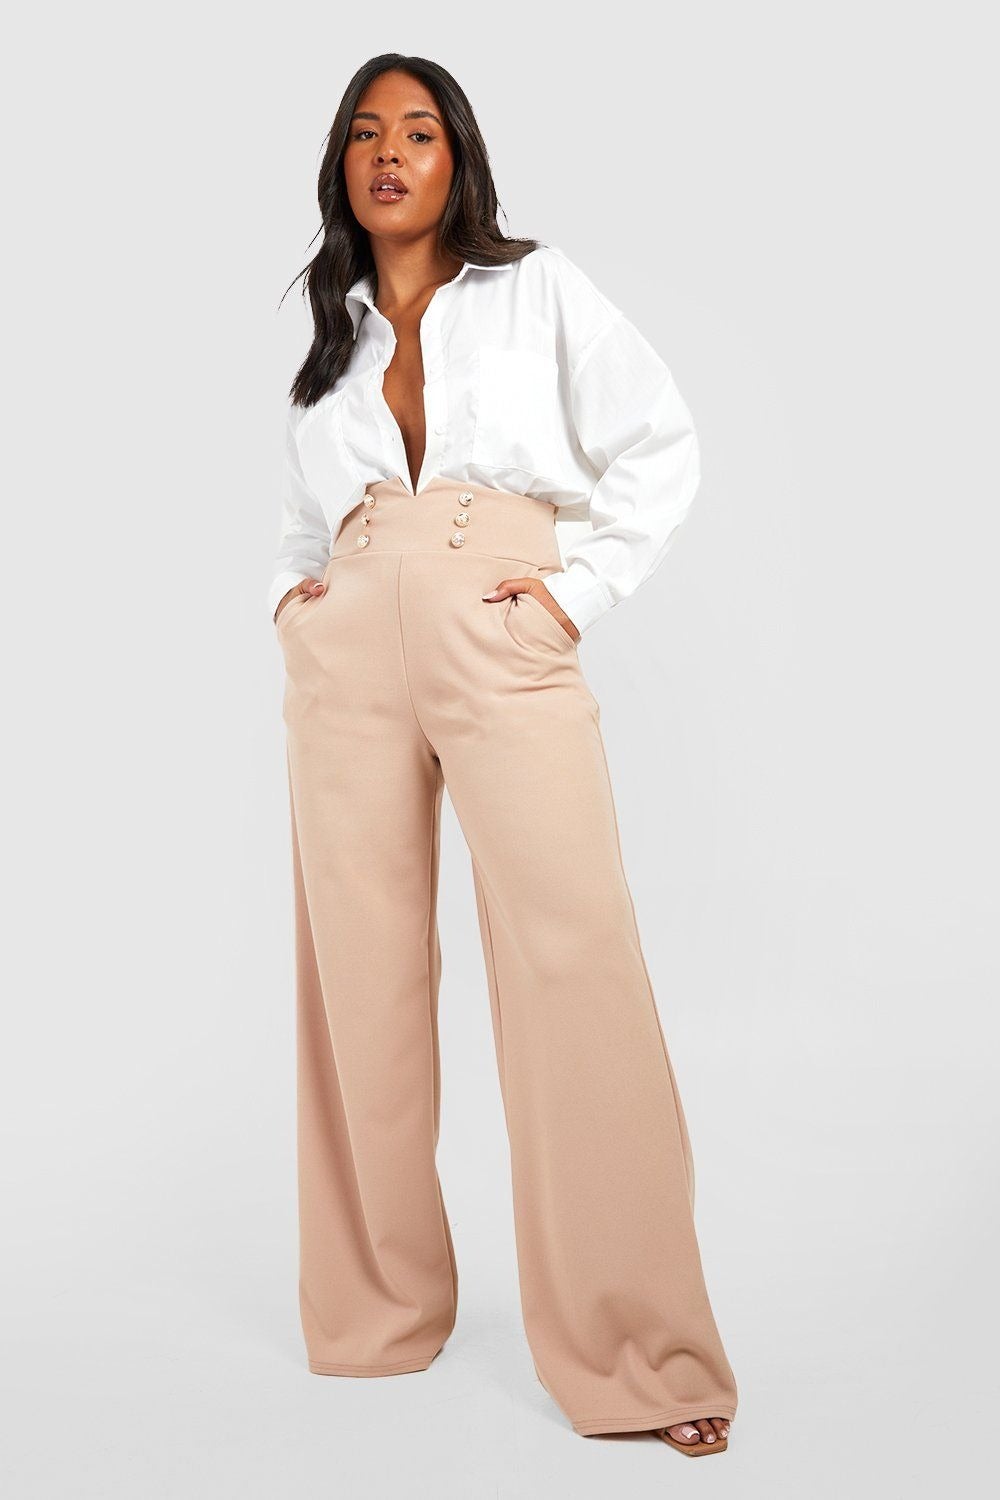 28 Pants That Aren't Jeans That'll Elevate Your Wardrobe